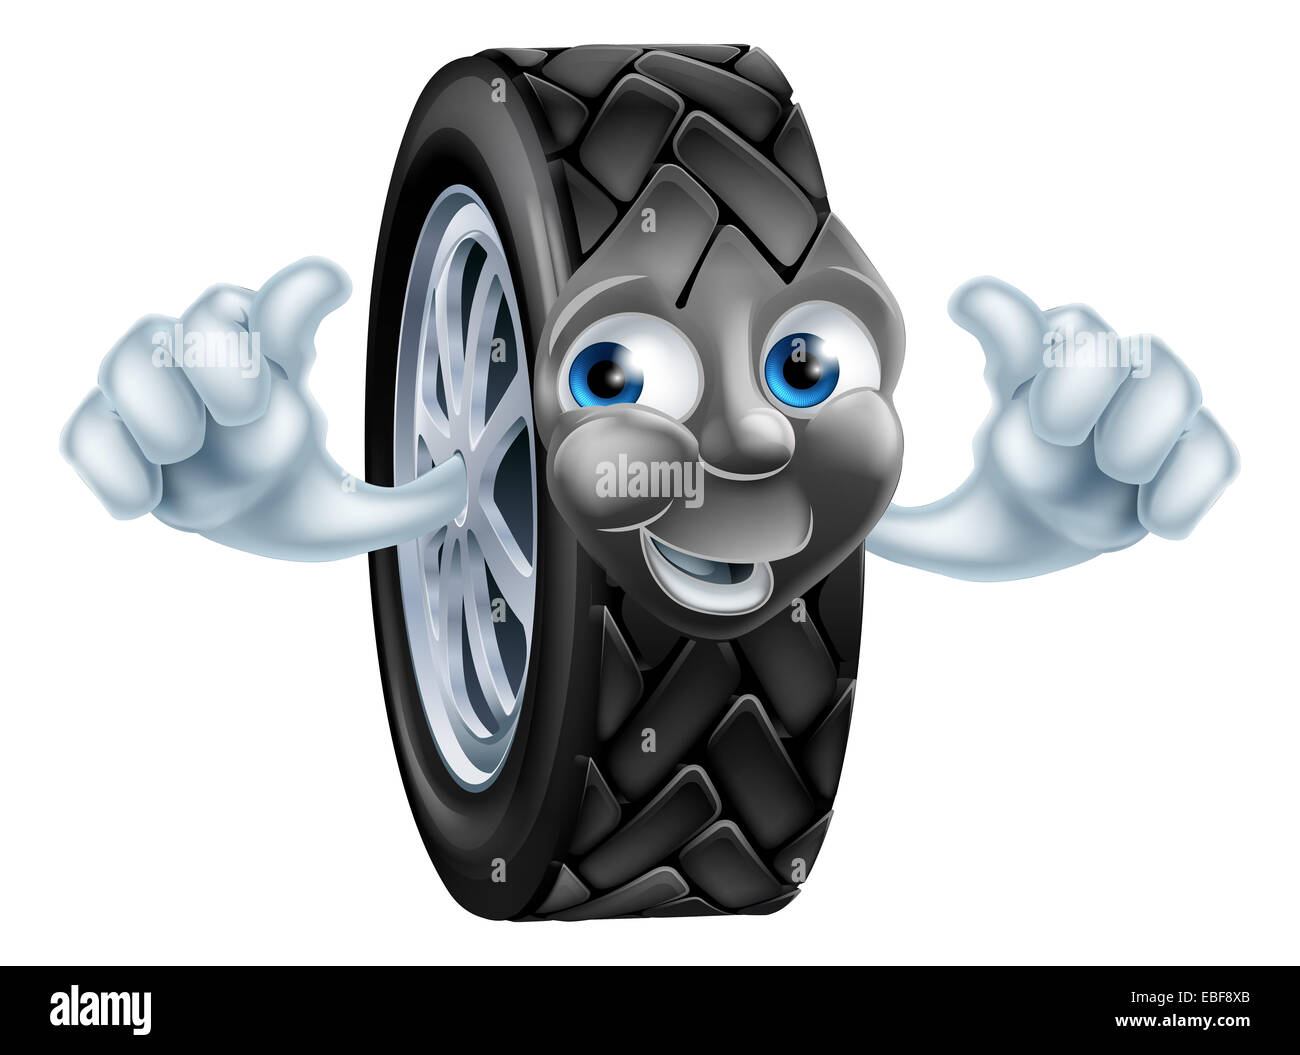 An illustration of a cartoon tire (tyre) character or mascot giving a thumbs up Stock Photo